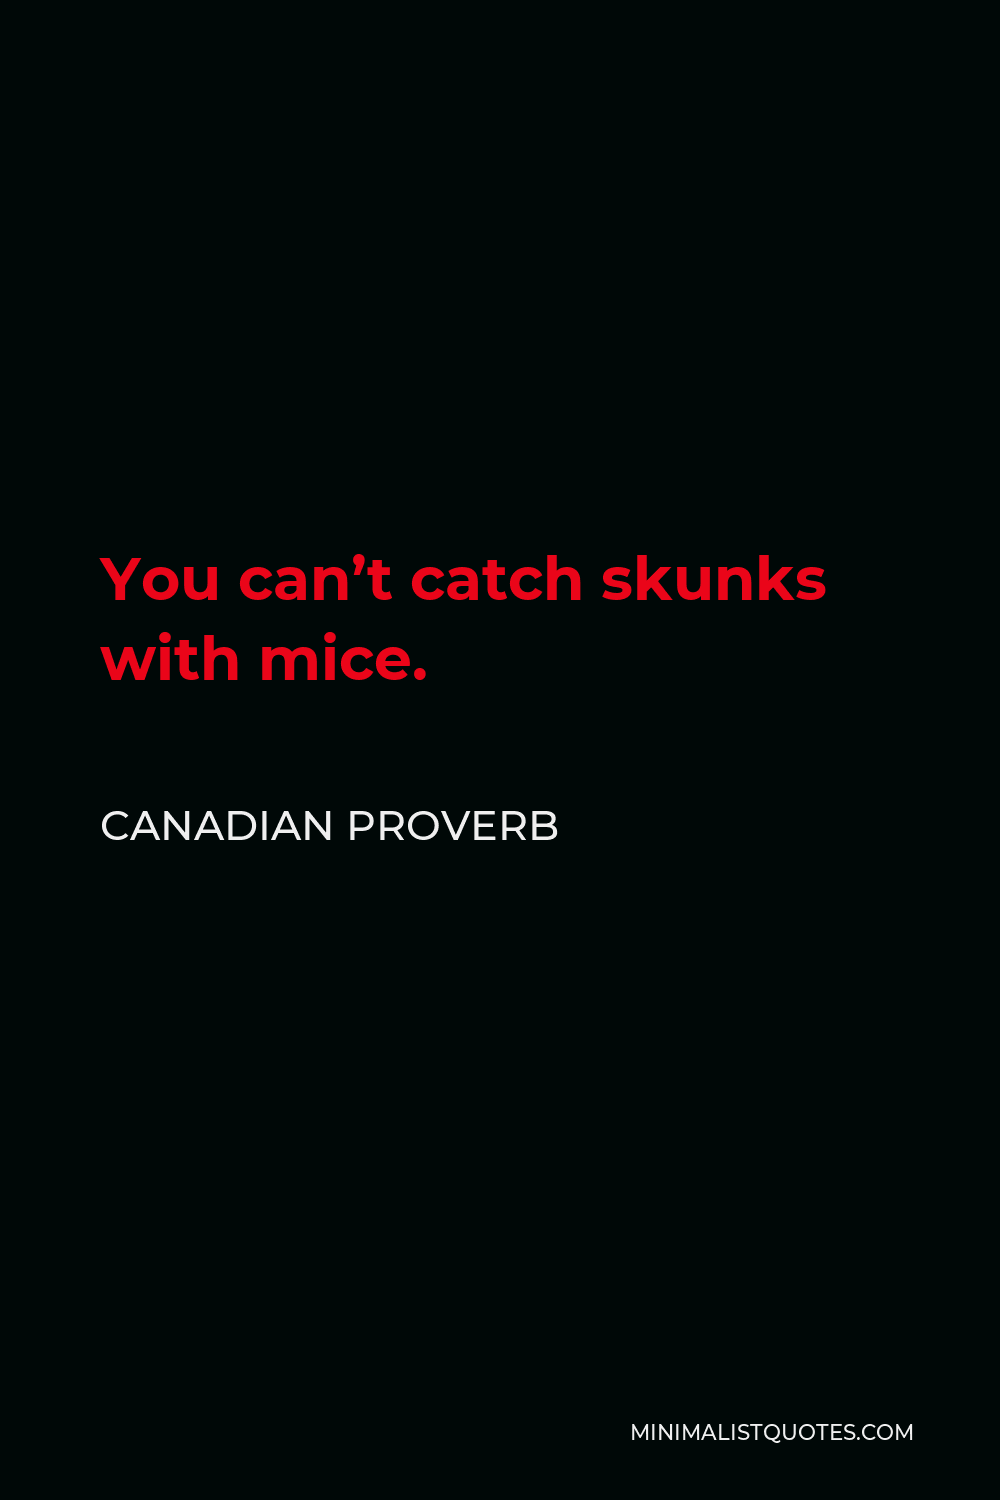 Canadian Proverb Quote - You can’t catch skunks with mice.